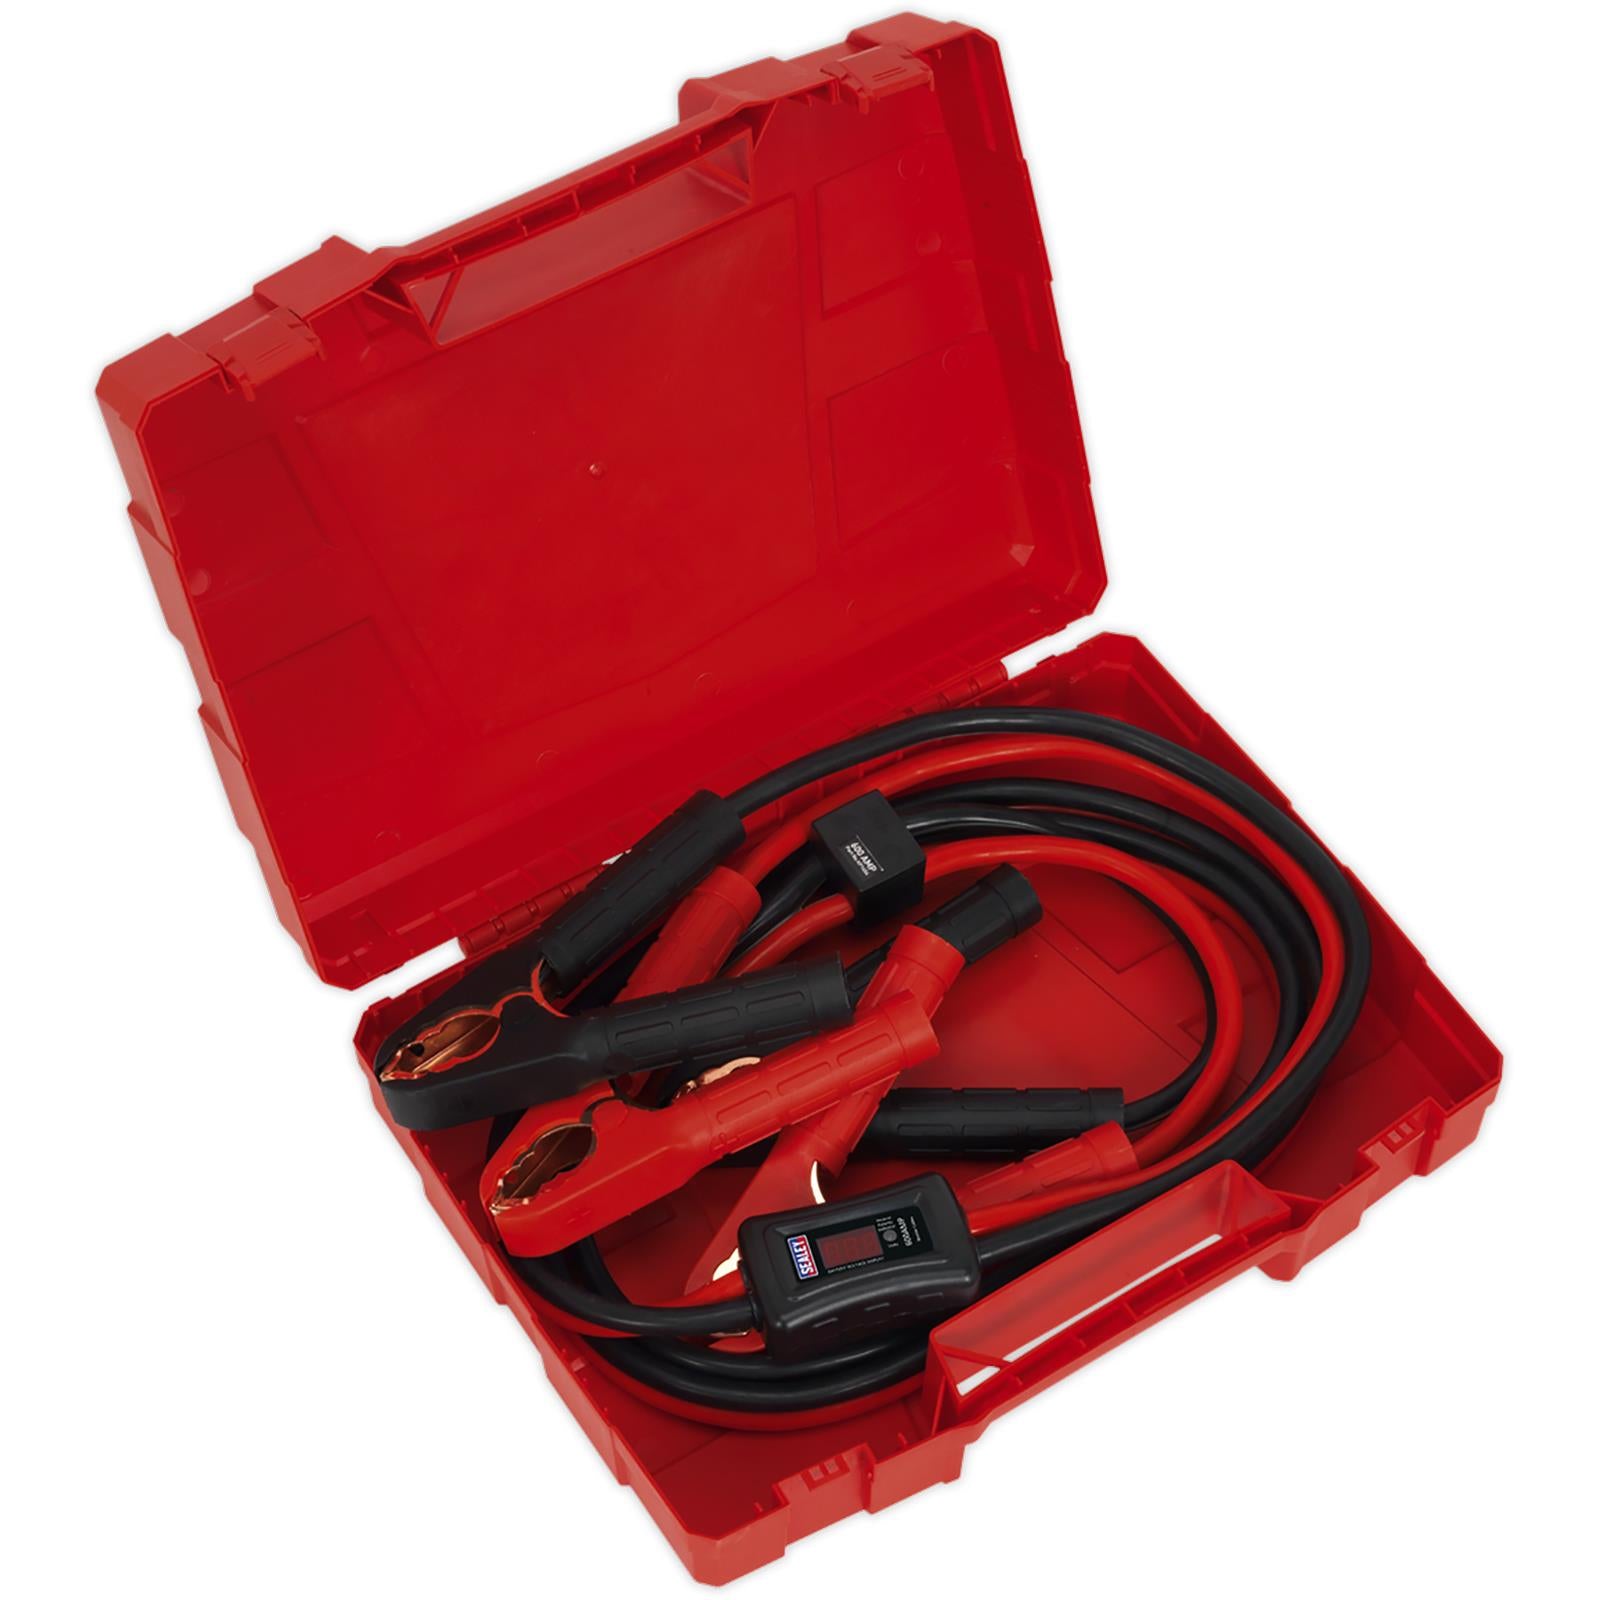 Sealey 25mm x 3.5m Booster Cables CCA 600A with Electronics Protection Case LED